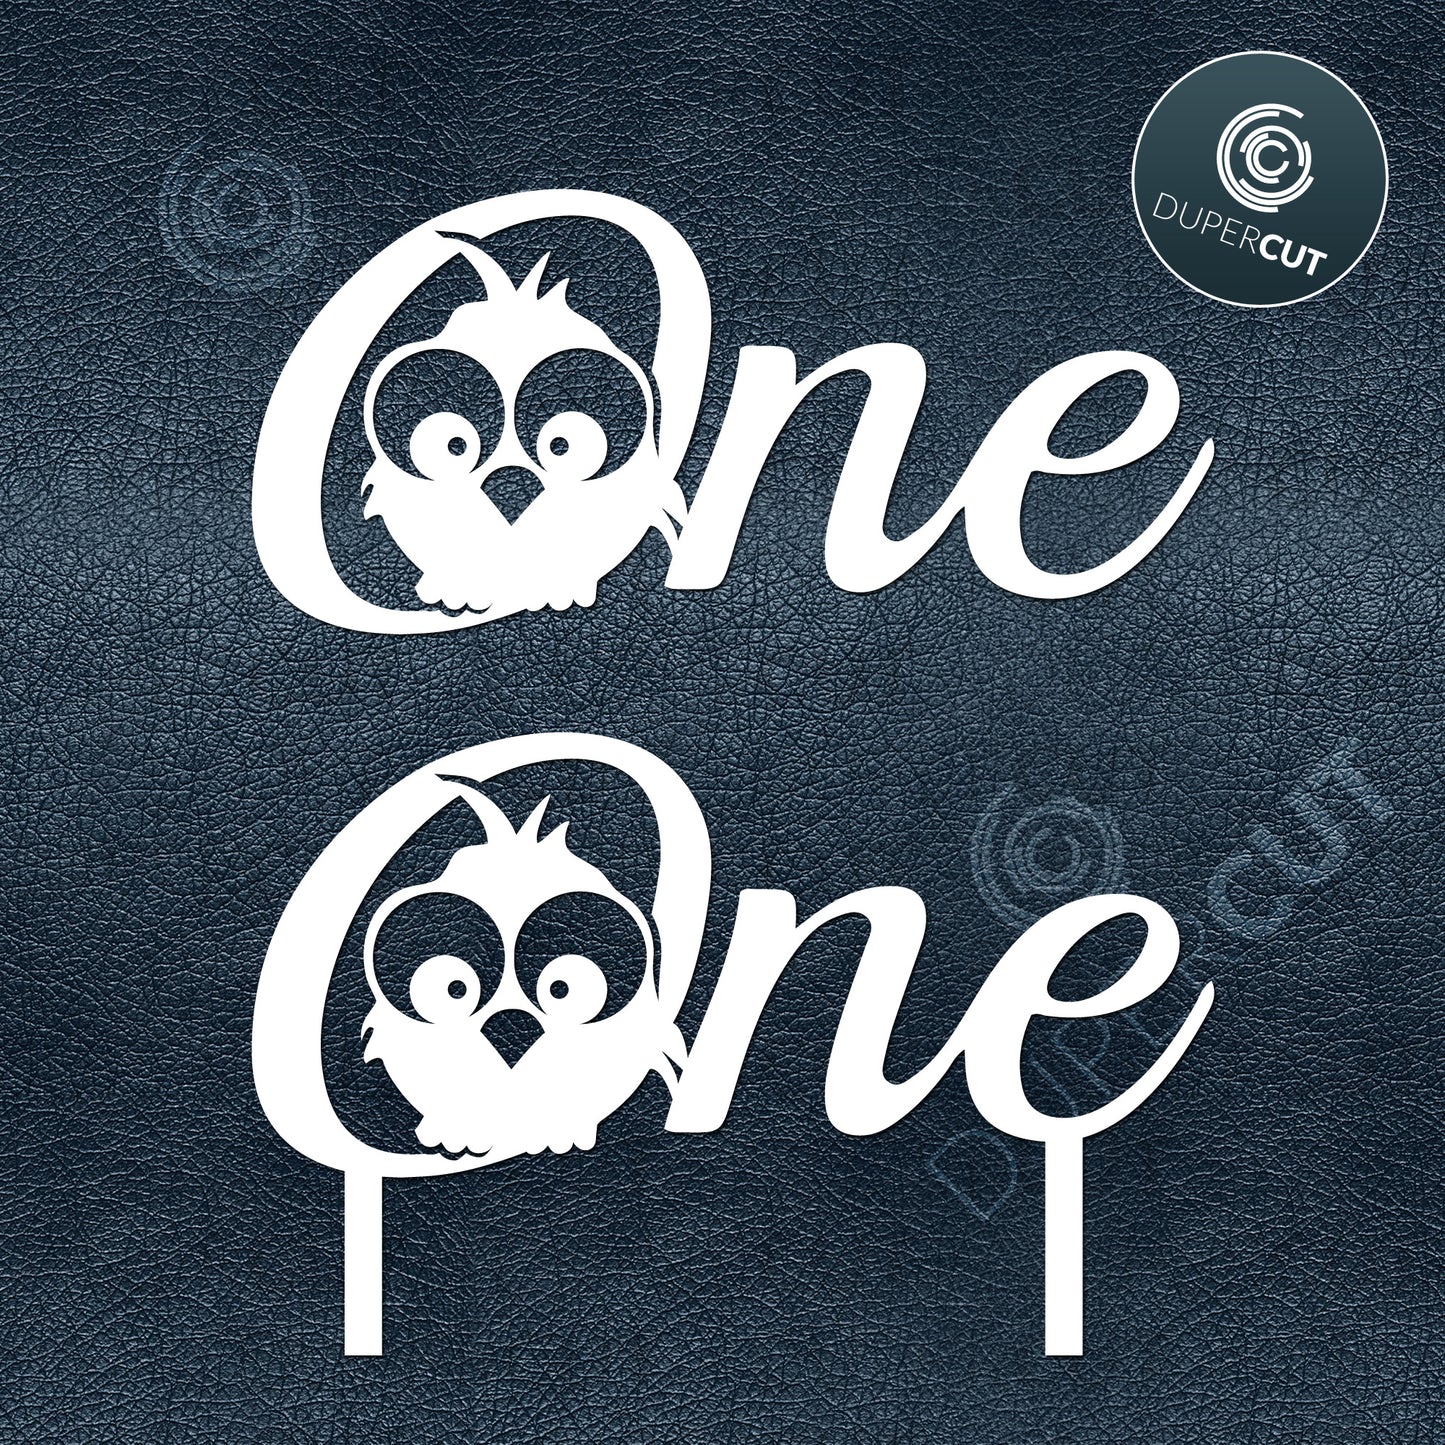 ONE - SVG, DXF, PNG files for DIY Cake topper with owl for first birthday. Printable, for Cricut, Silhouette Cameo, Glowforge, CNC machines.